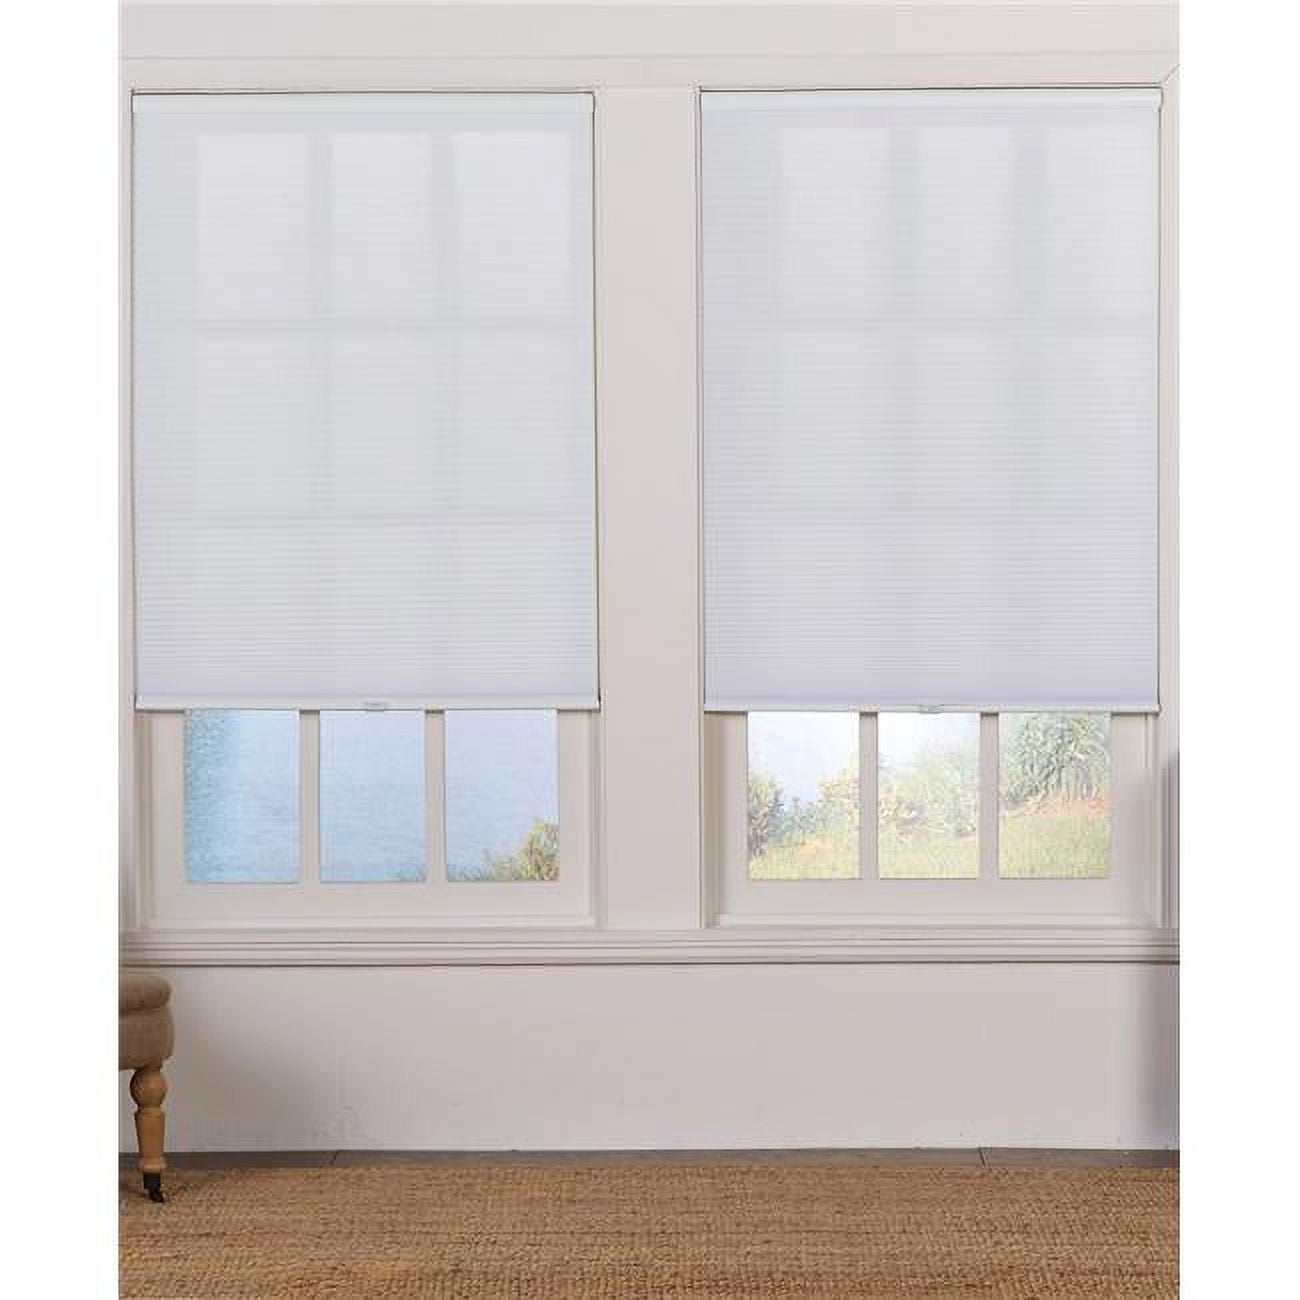 Ubc29x72wt Cordless Light Filtering Cellular Shade, White - 29 X 72 In.